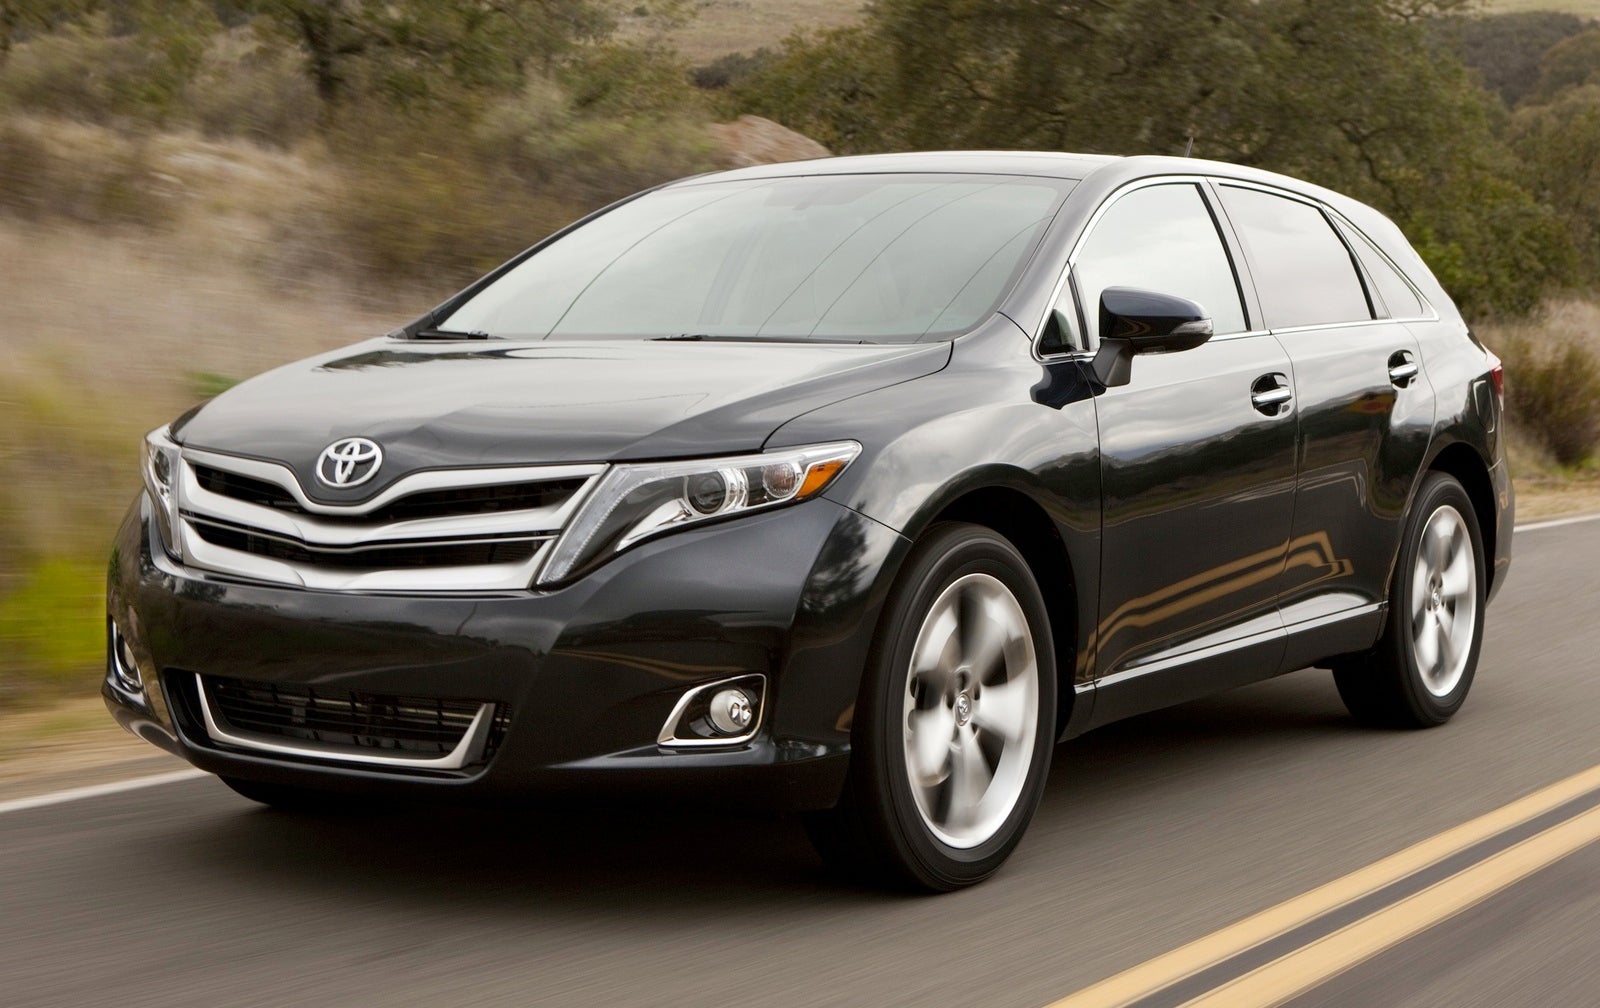 2014 Toyota Venza  Test Drive Review  CarGurus